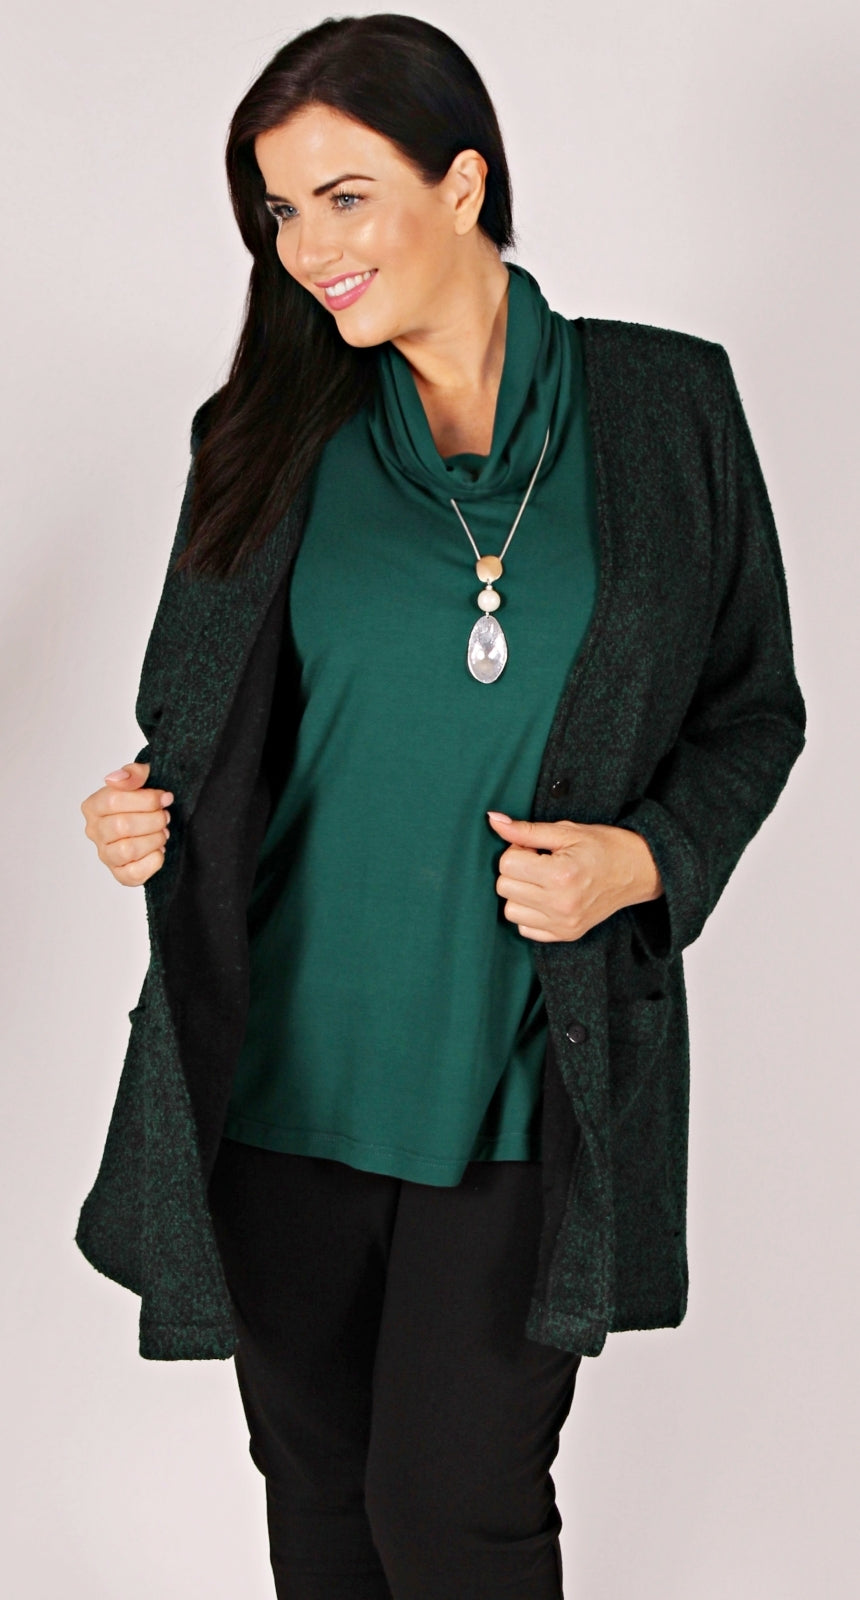 Cowl Neck Knit Top Forest